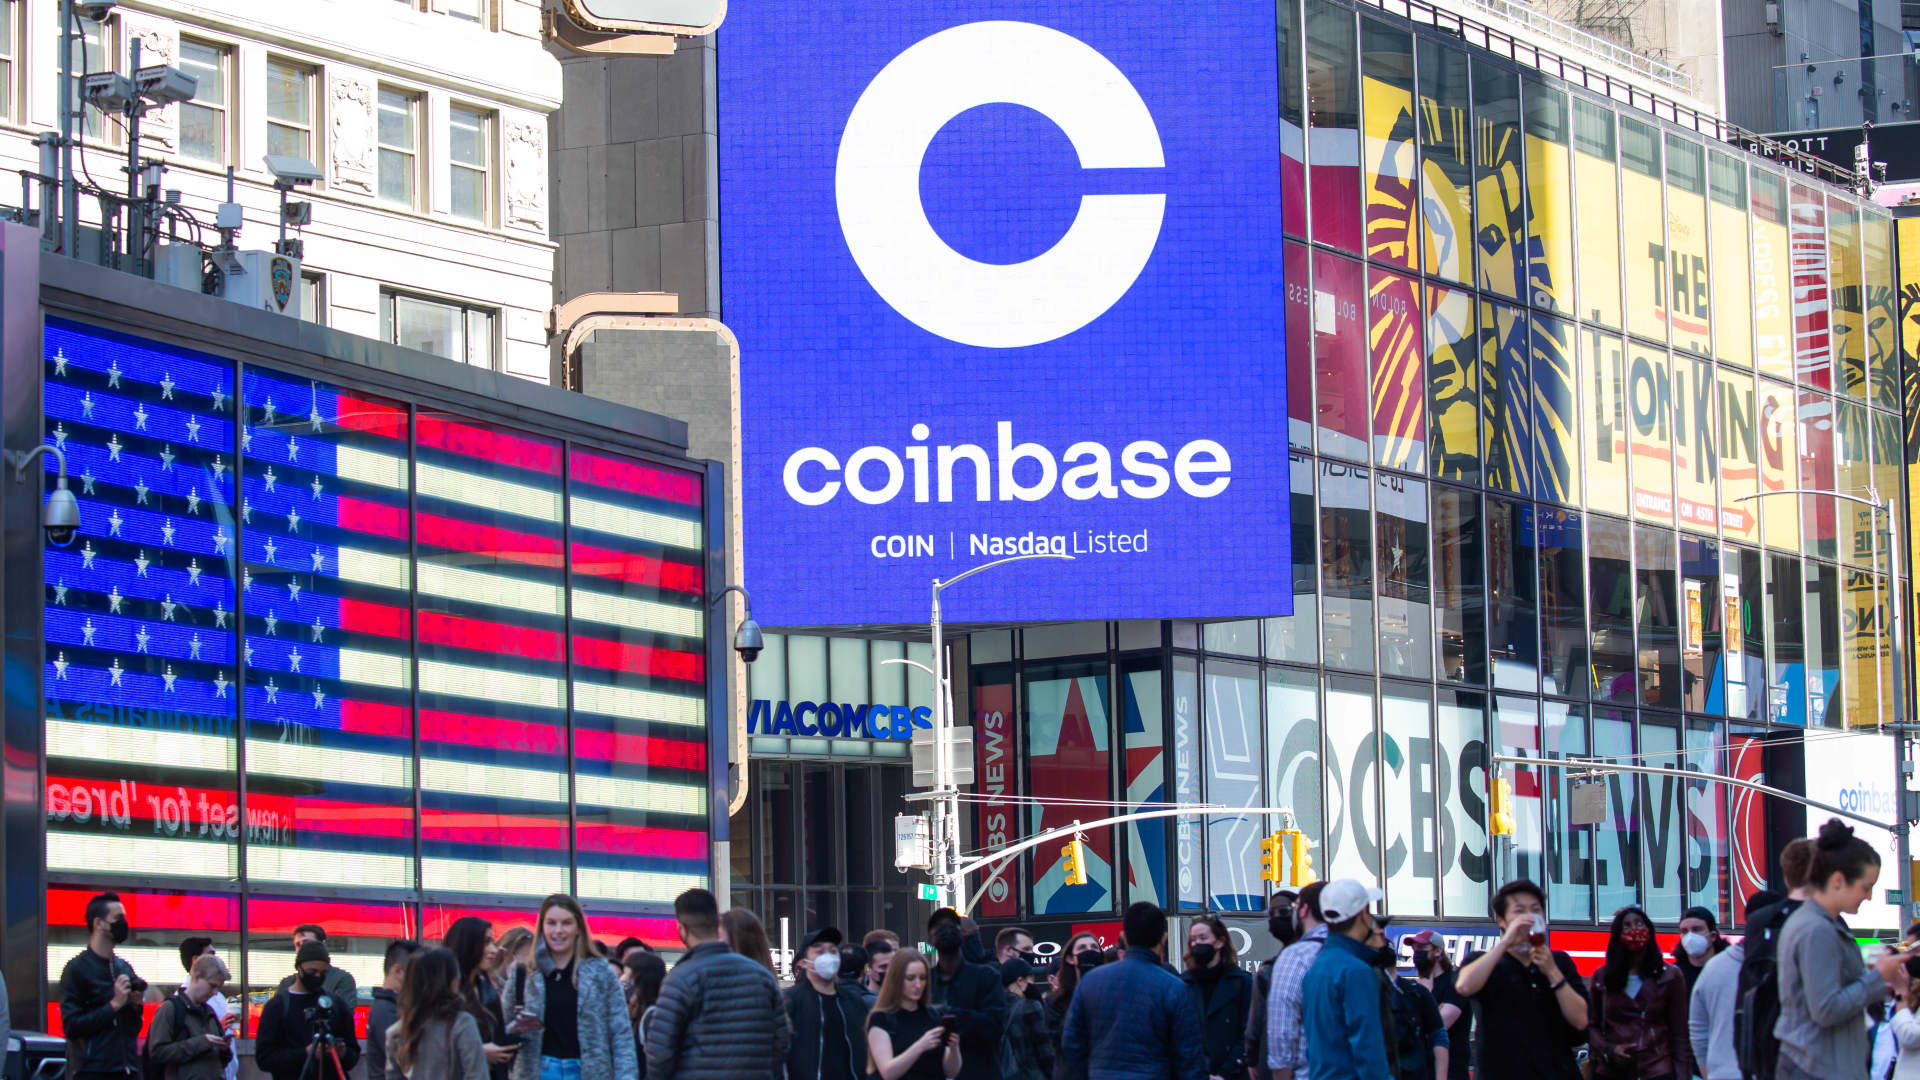 Coinbase stock pops 17% as cryptocurrencies bitcoin and ether rally